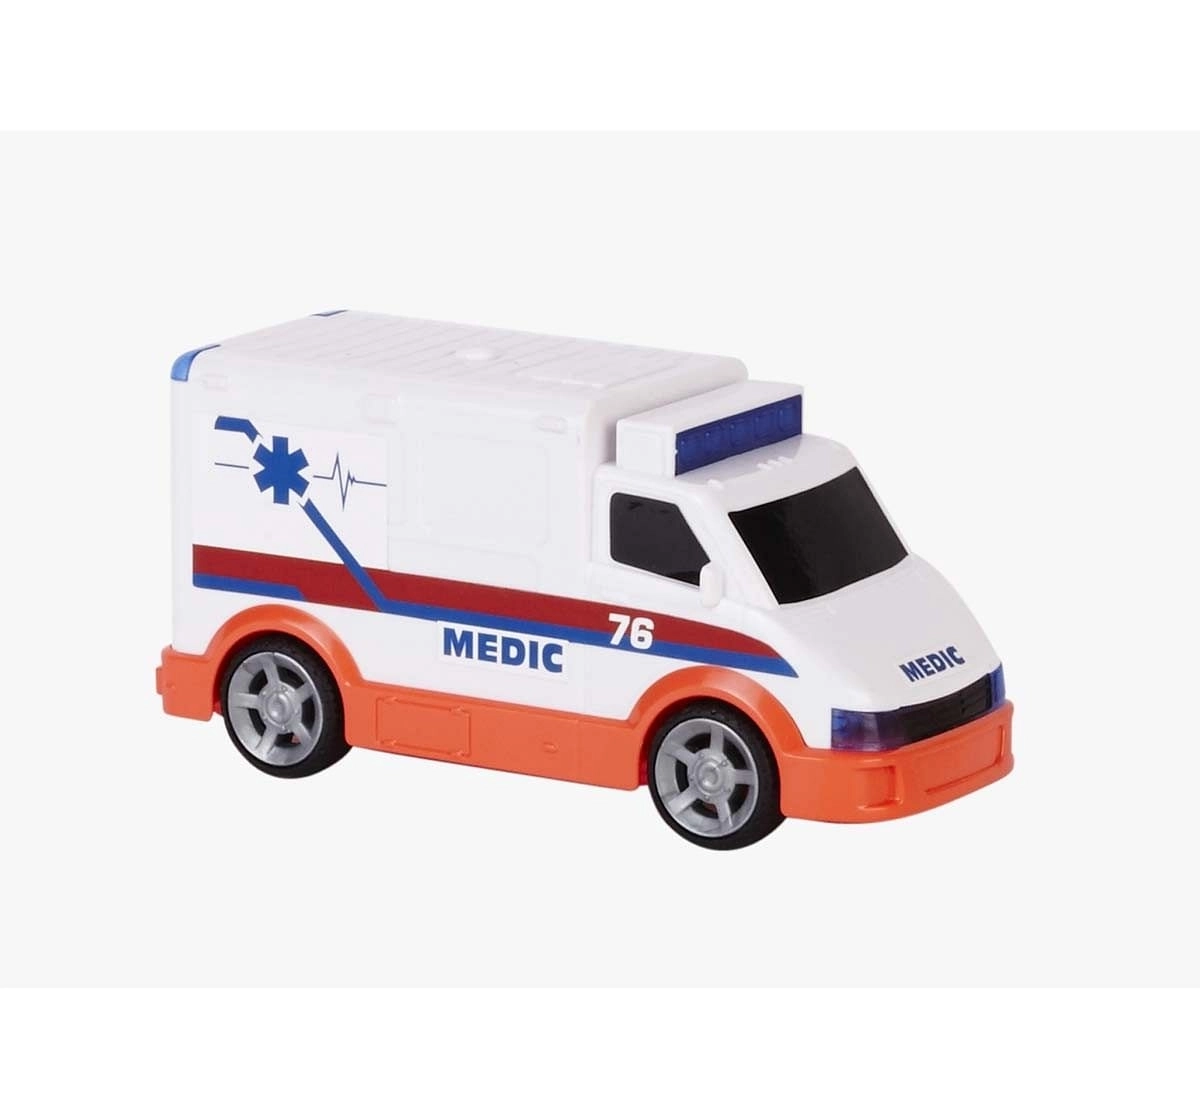 Teamsterz Light & Sound Ambulance - White Vehicles for Kids age 3Y+ 